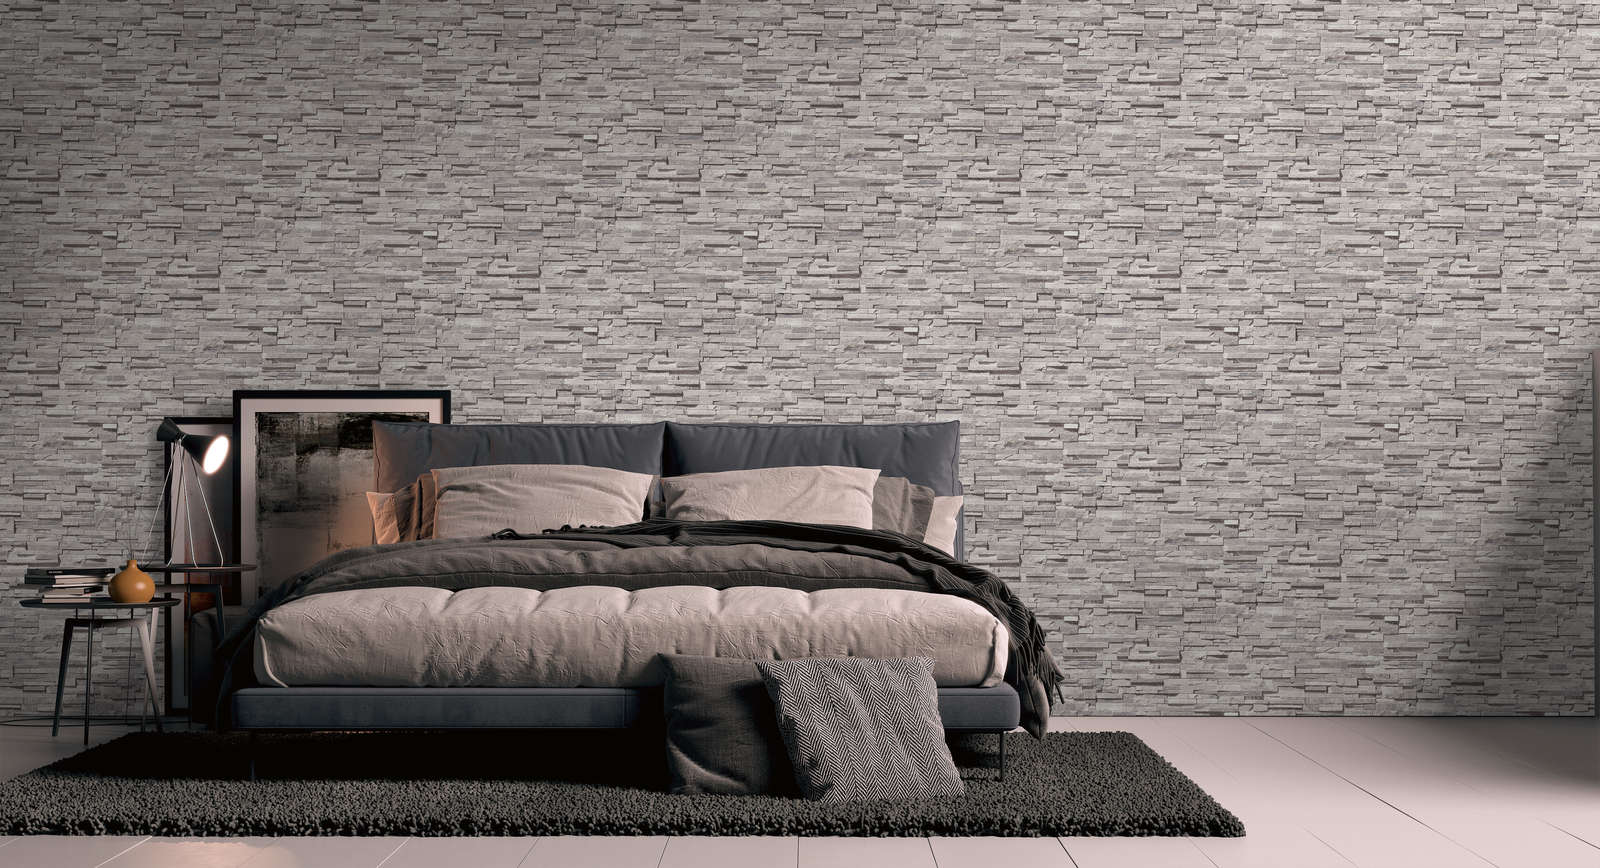             Stone-look non-woven wallpaper with glossy pattern - light grey, beige, silver
        